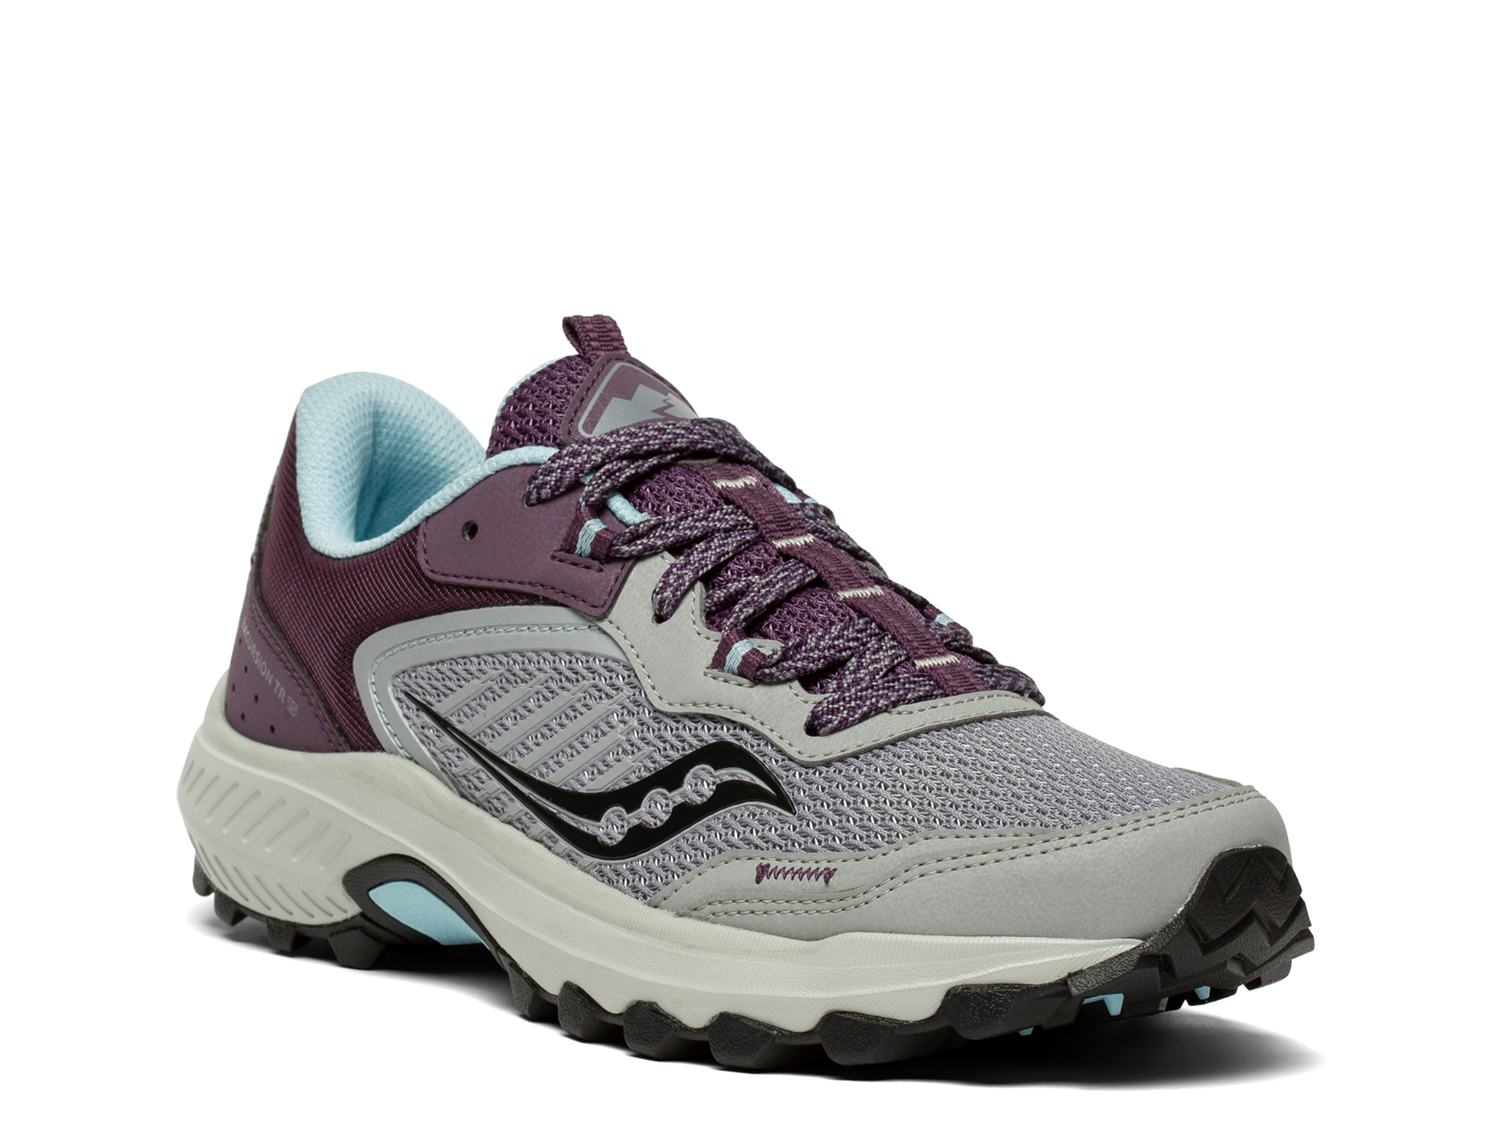 Details about   Original Saucony Running Shoes for Women Grey  S15302-3